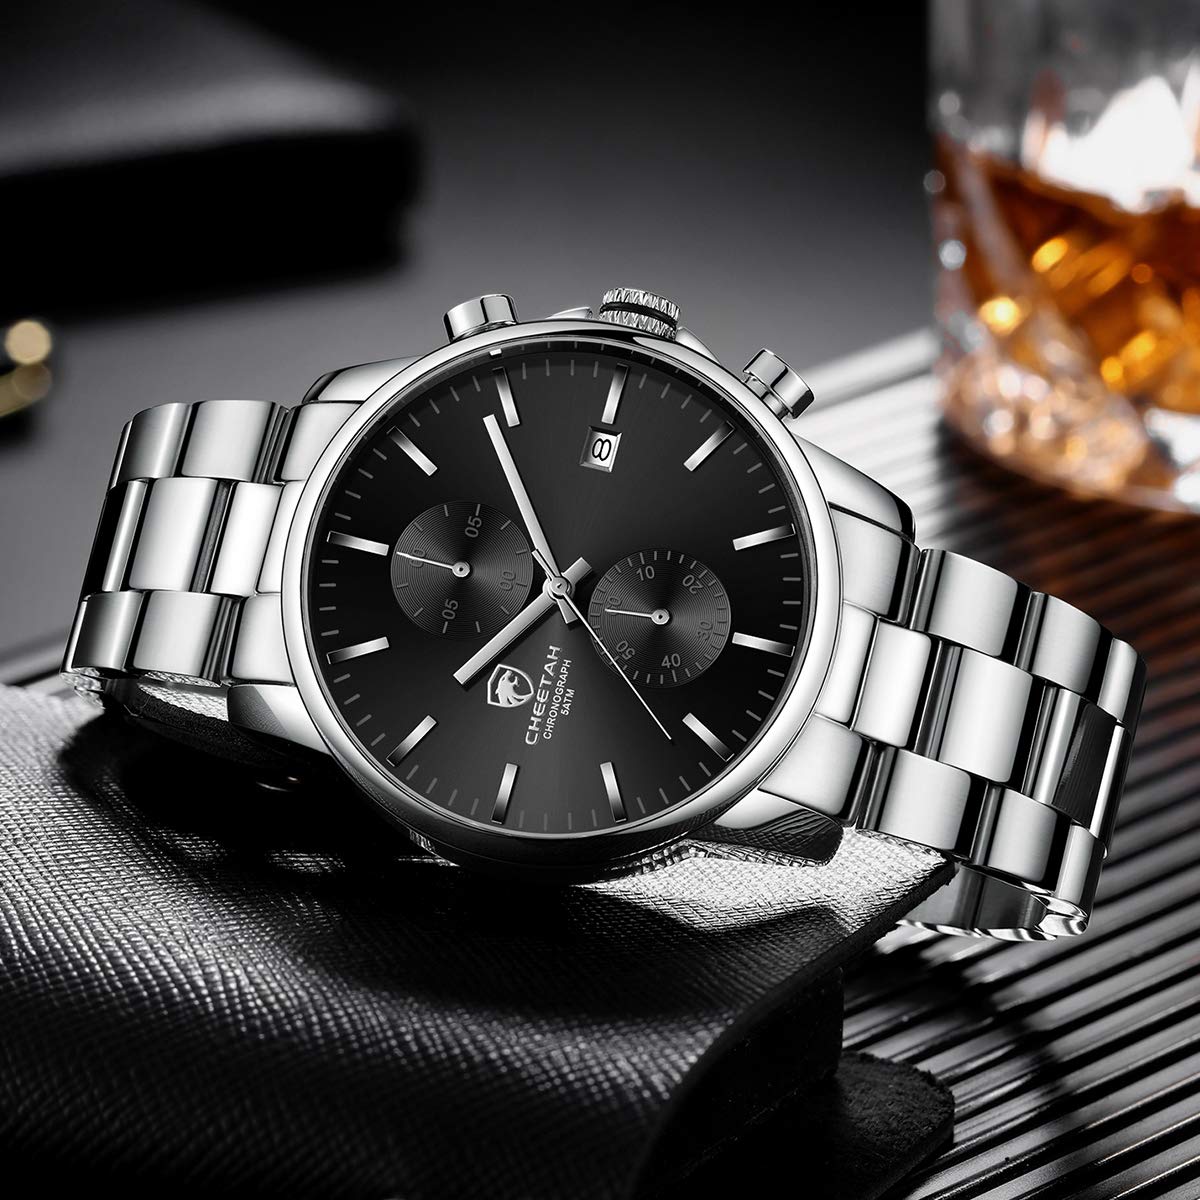 GOLDEN HOUR Fashion Business Mens Watches with Stainless Steel Waterproof Chronograph Quartz Watch for Men, Auto Date